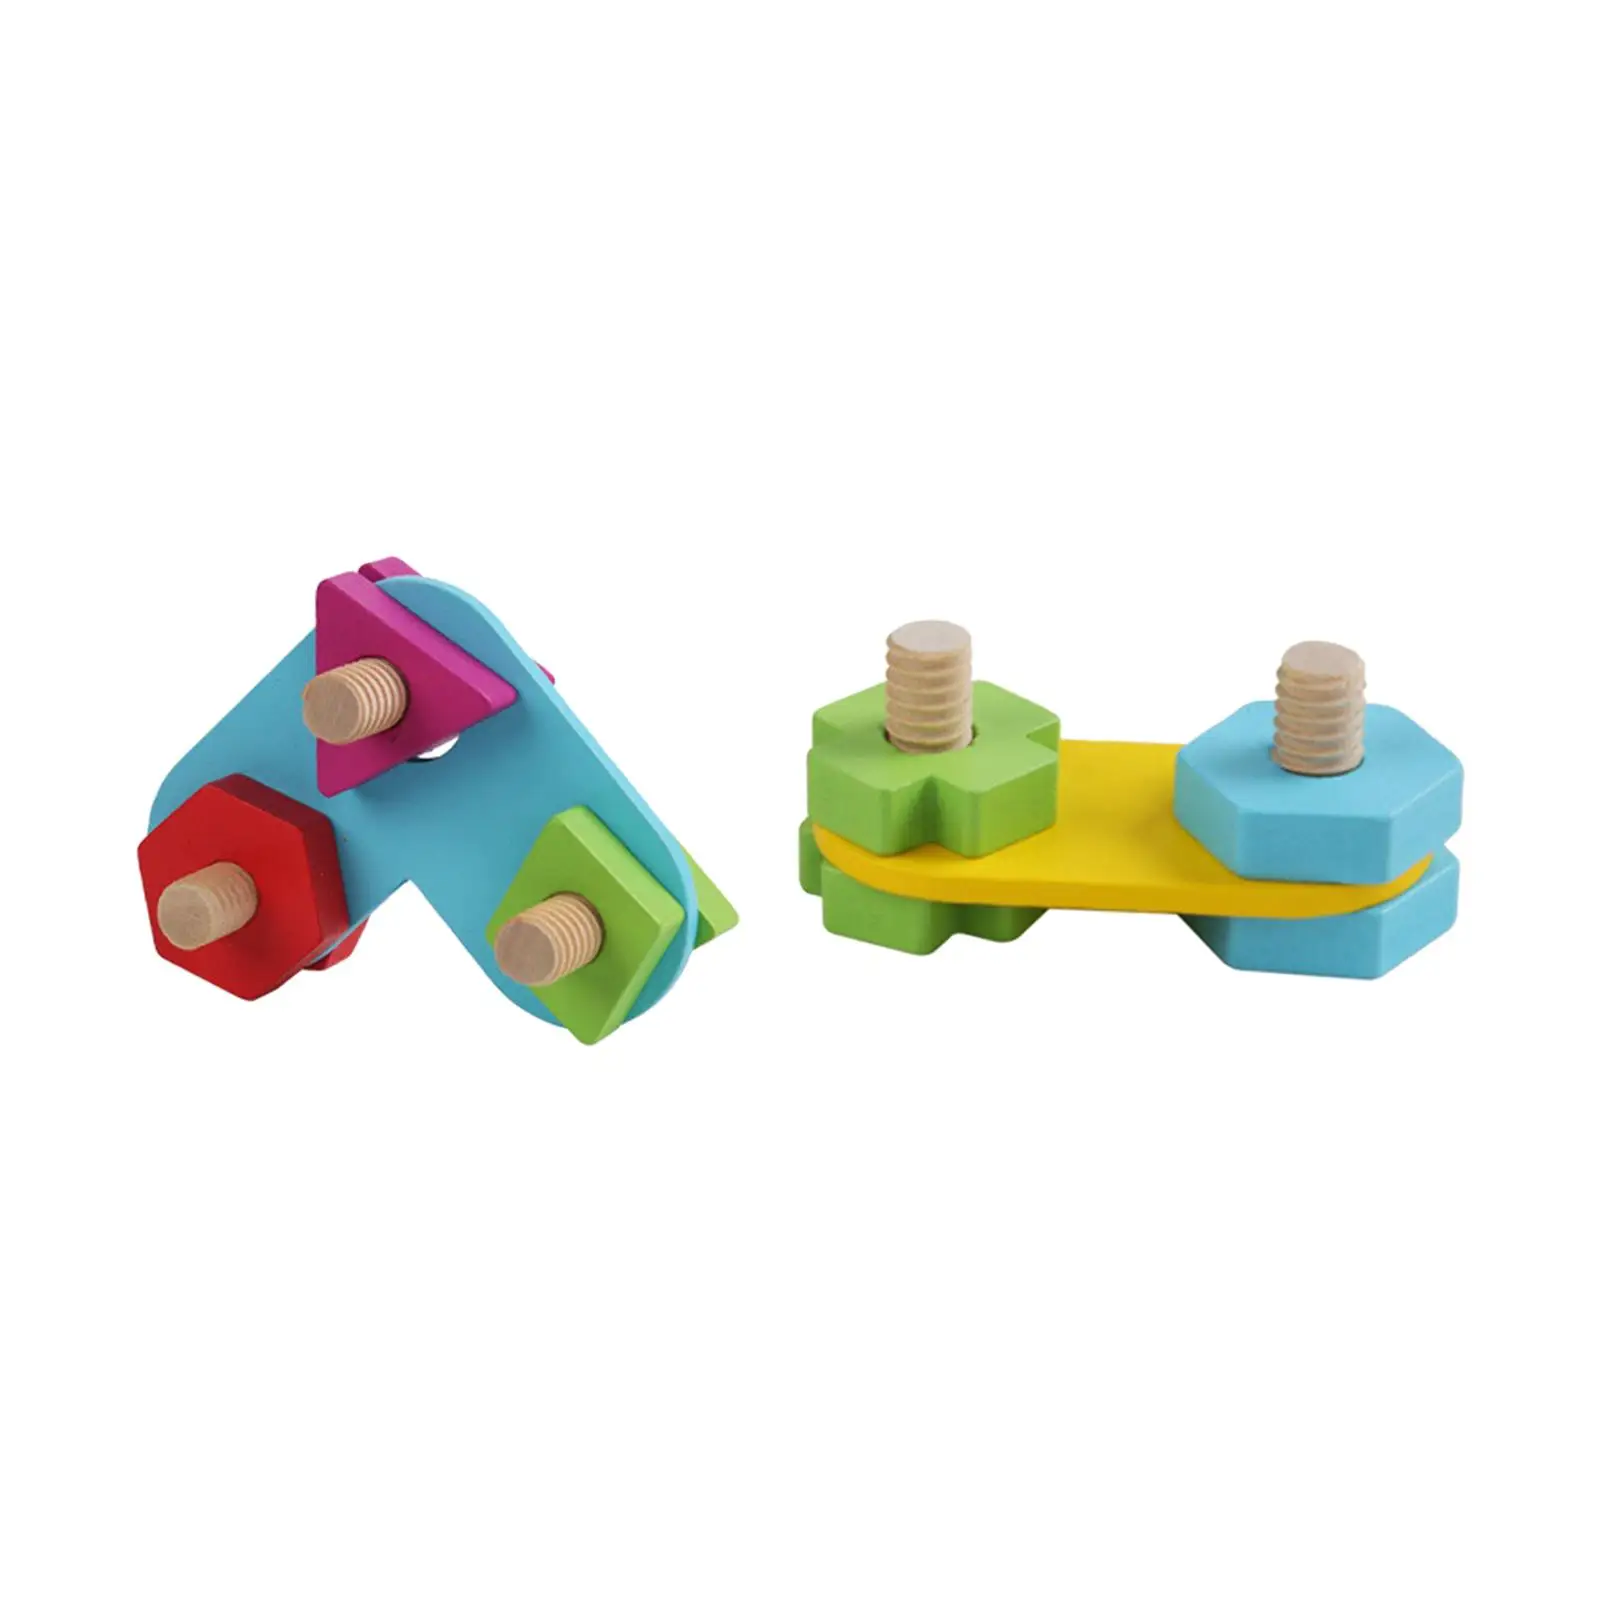 Kids Nuts and Bolts Toy Montessori Educational Toy for Birthday Gift Kids